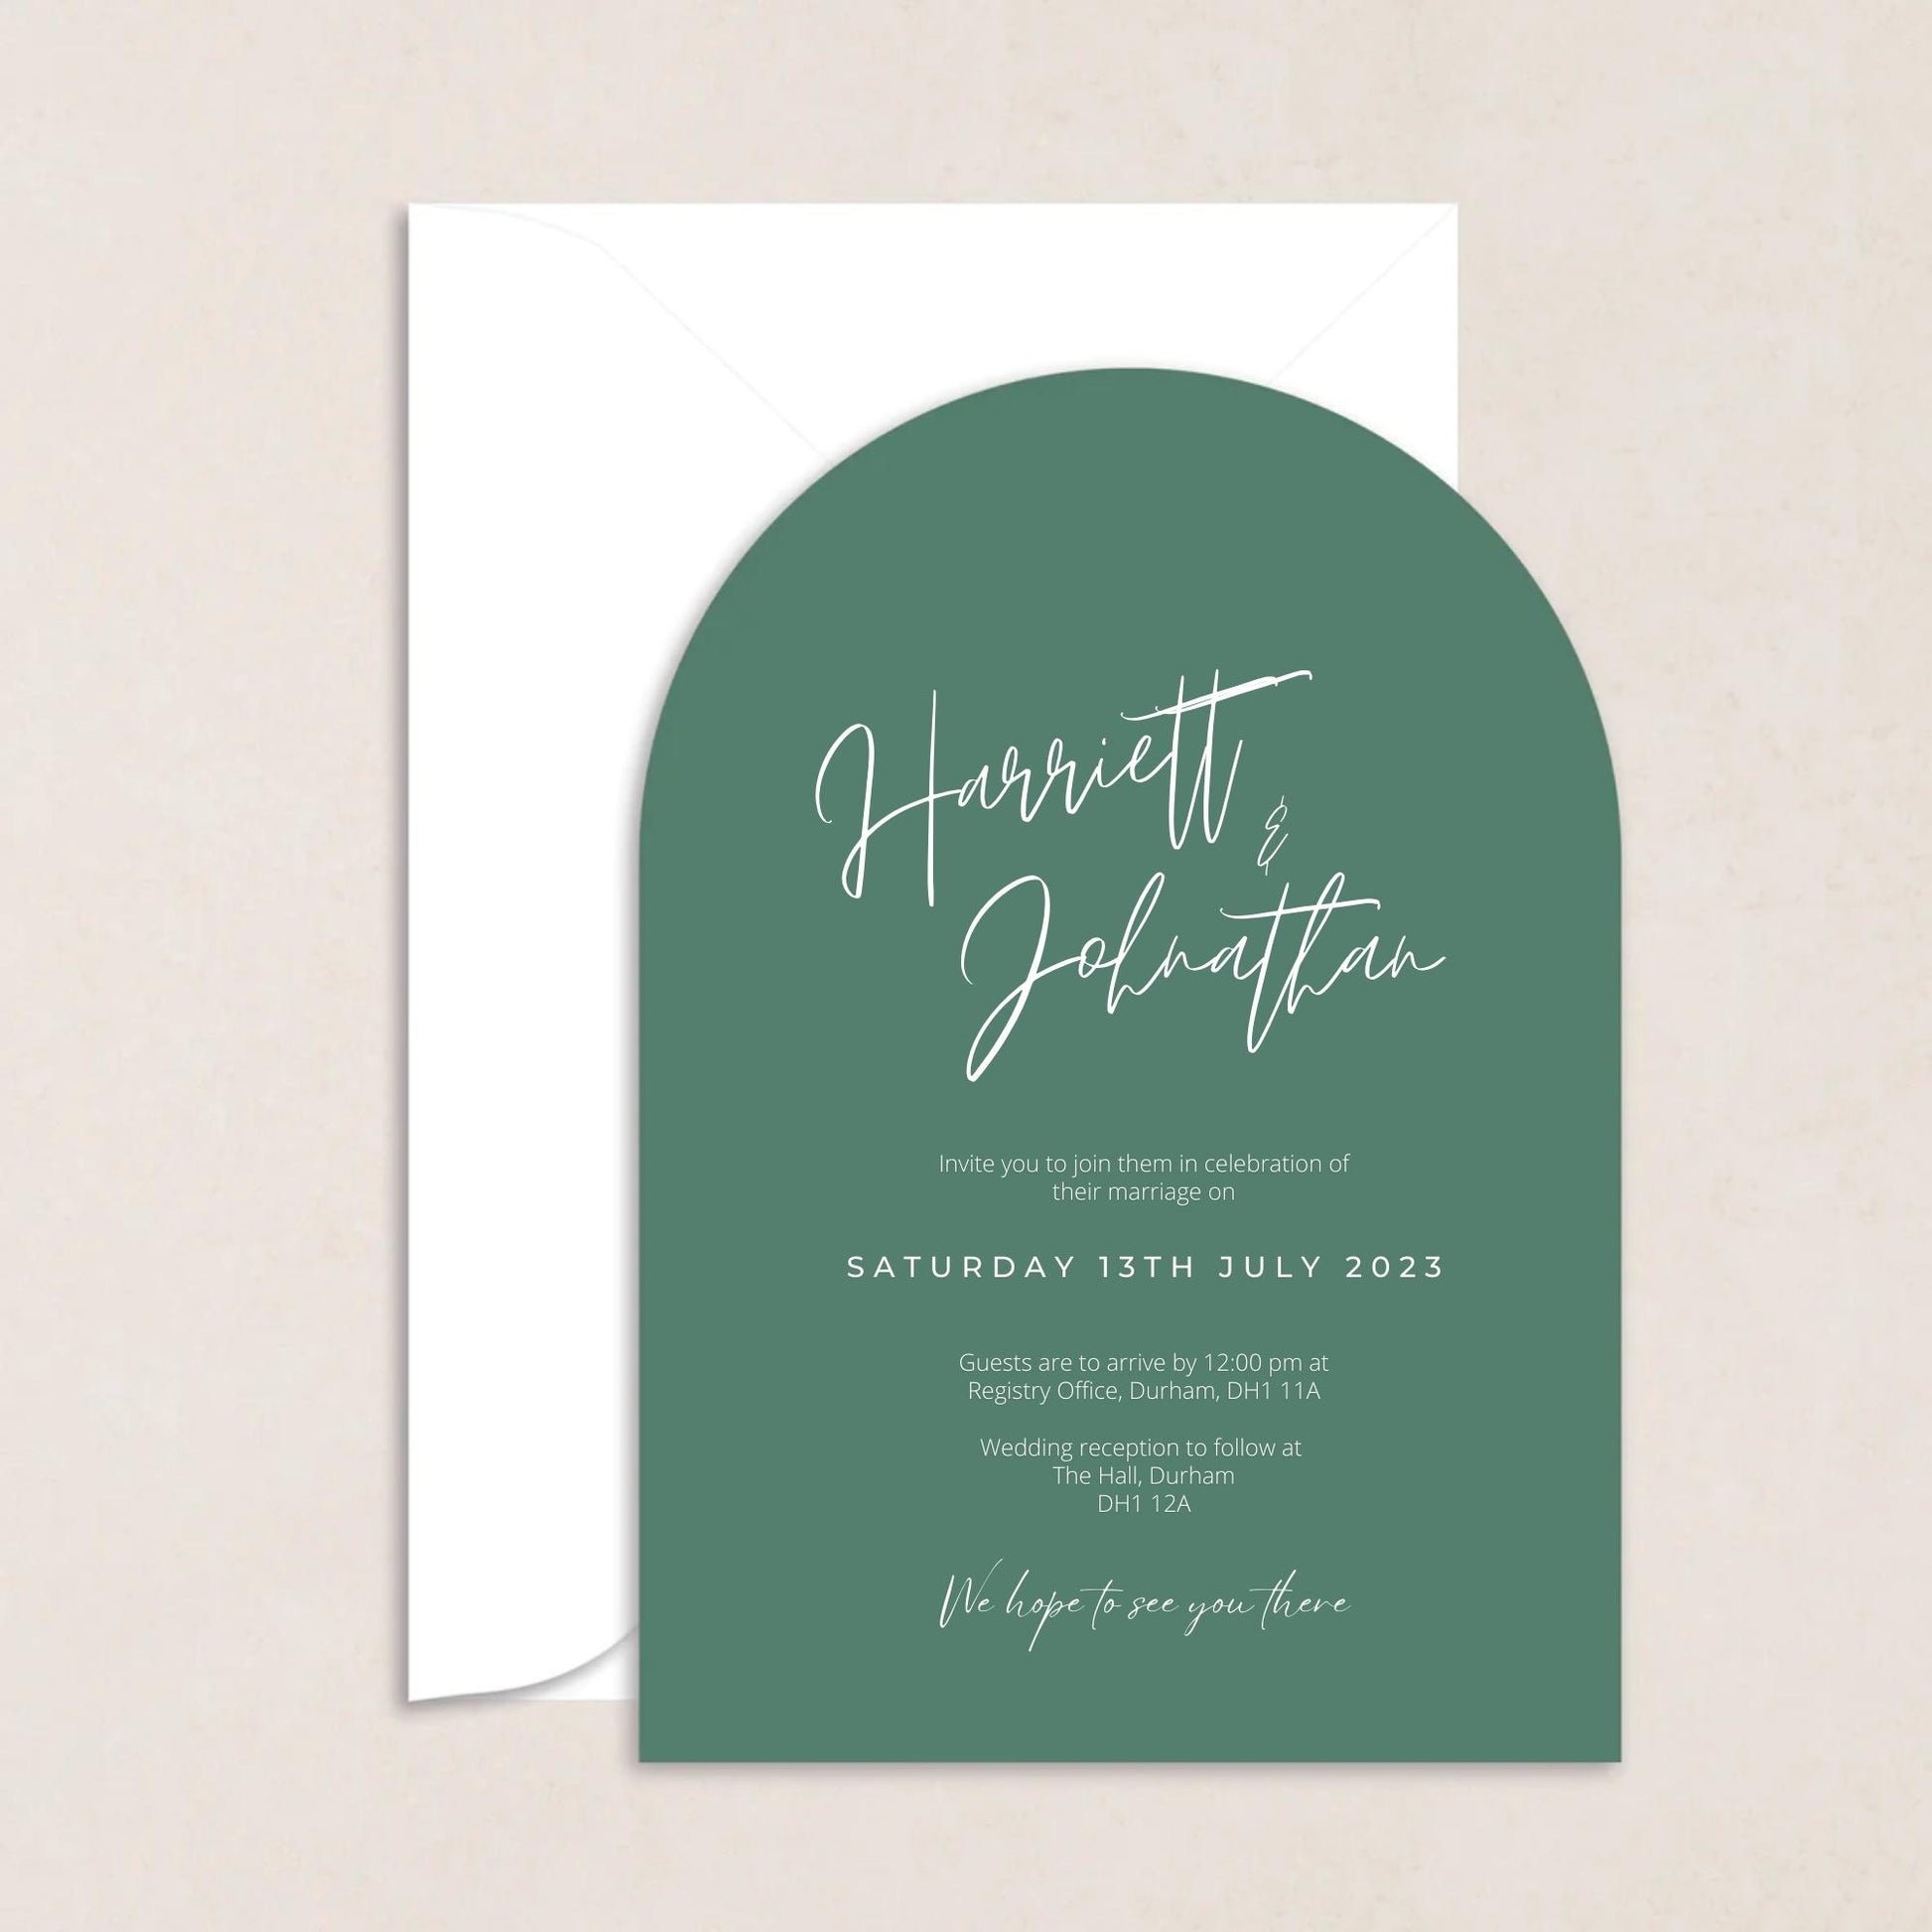 Harriett Wedding Invitations - Wedding Invitations available at The Ivy Collection | Luxury Wedding Stationery